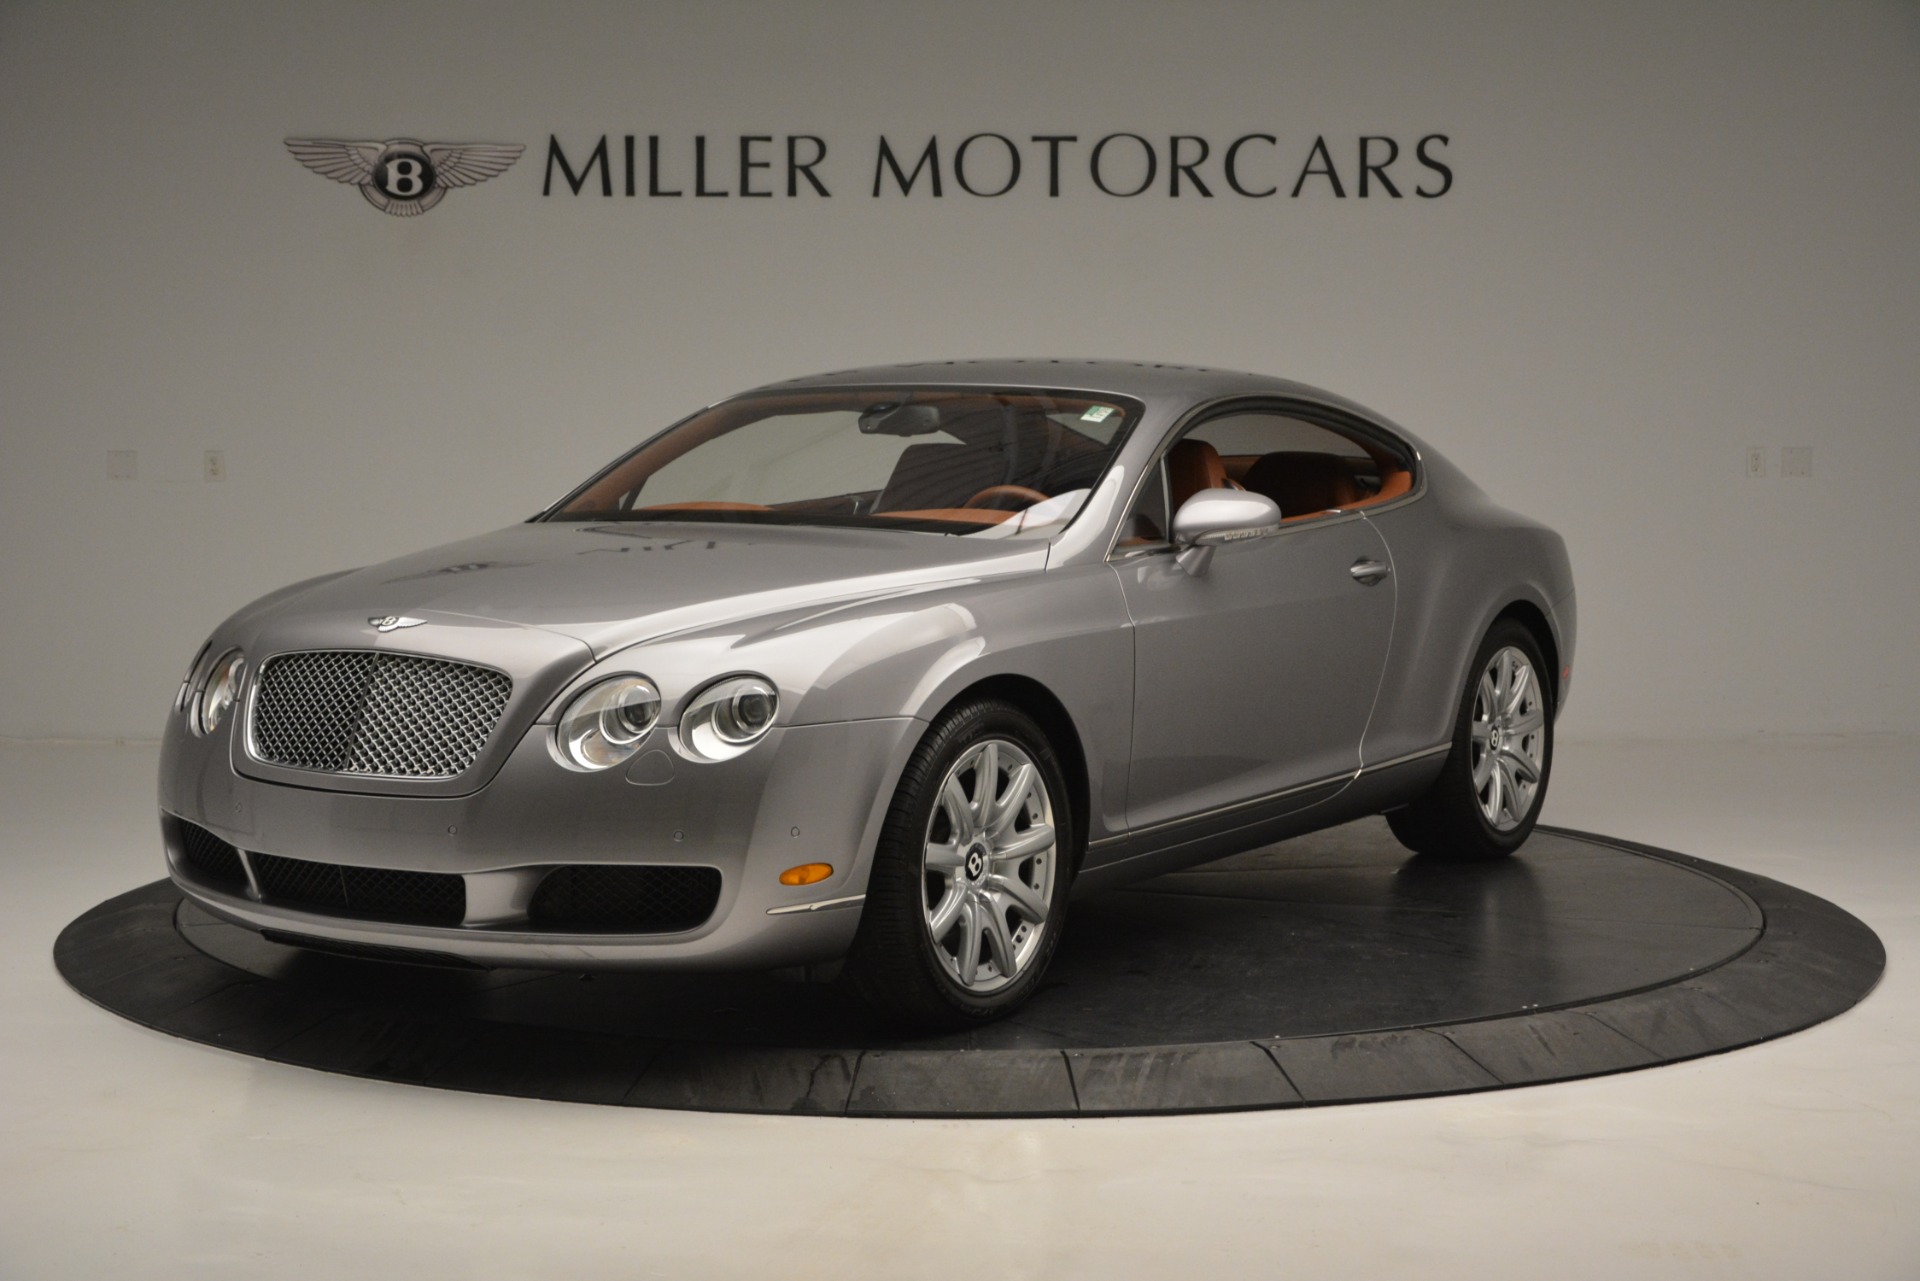 Used 2005 Bentley Continental GT GT Turbo for sale Sold at Bugatti of Greenwich in Greenwich CT 06830 1